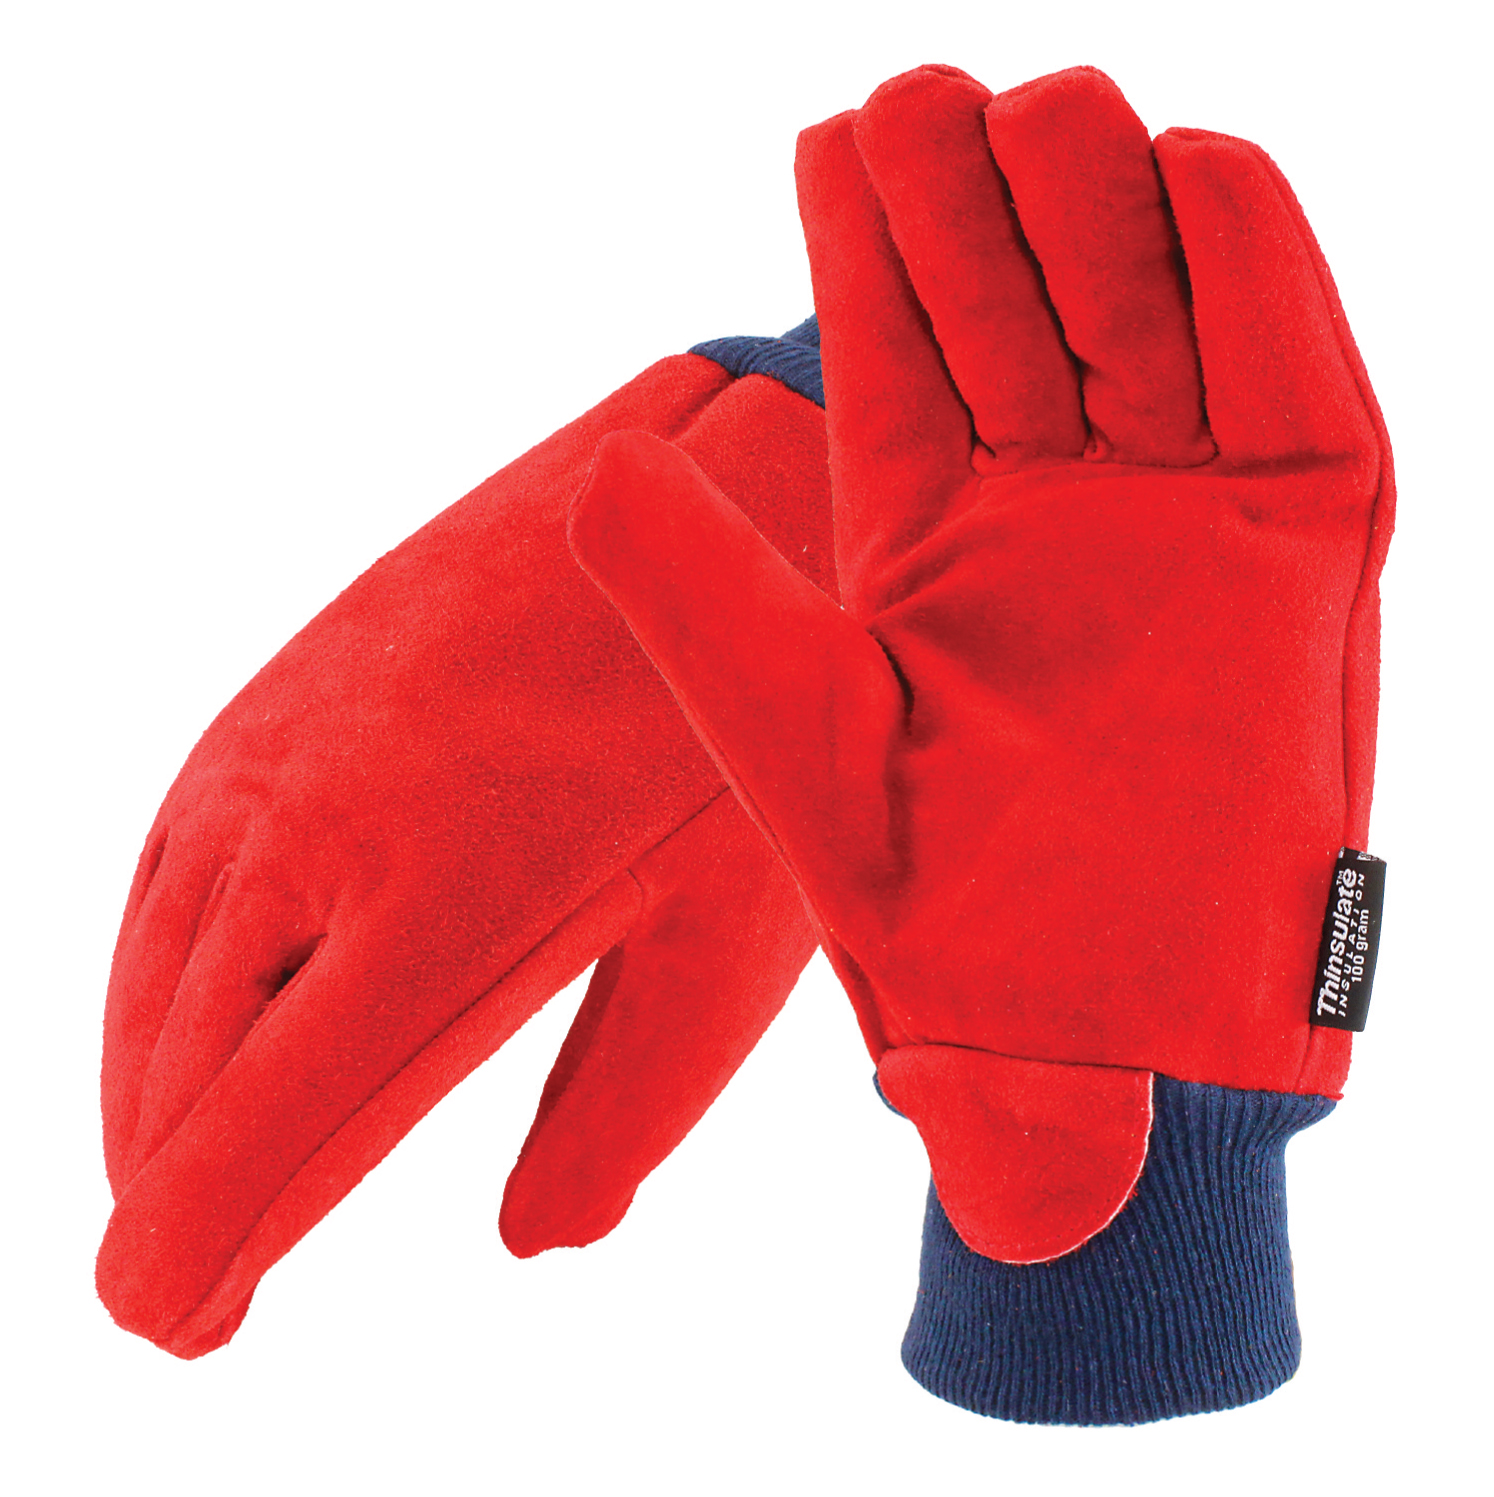 Insulated Leather Freezer Gloves